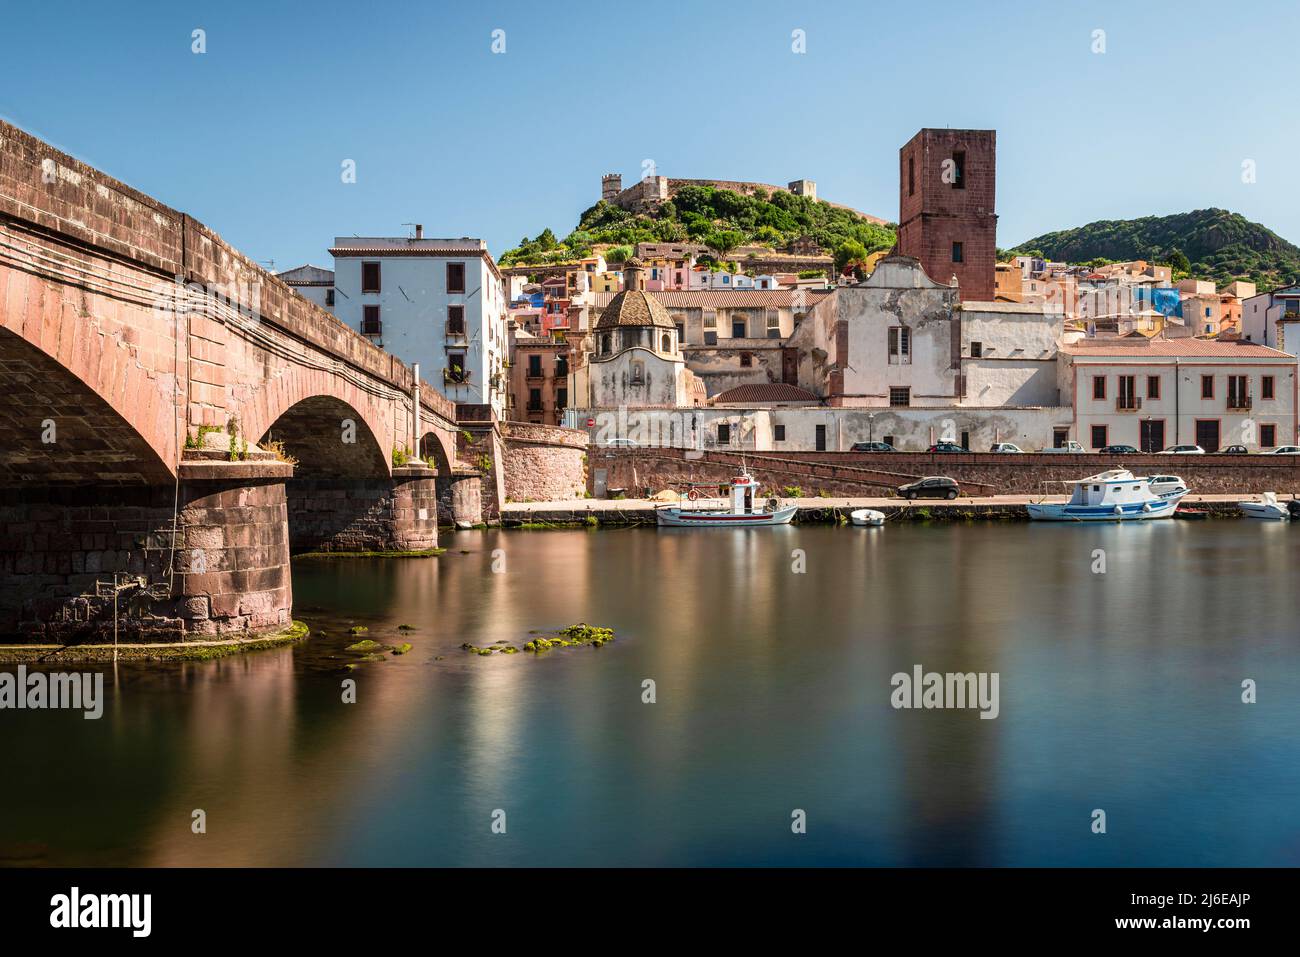 Picturesque Bosa - Stone bridge over the river Temo in front of the colourful houses of the old town and Malaspina Castle, Planargia, Sardinia Stock Photo